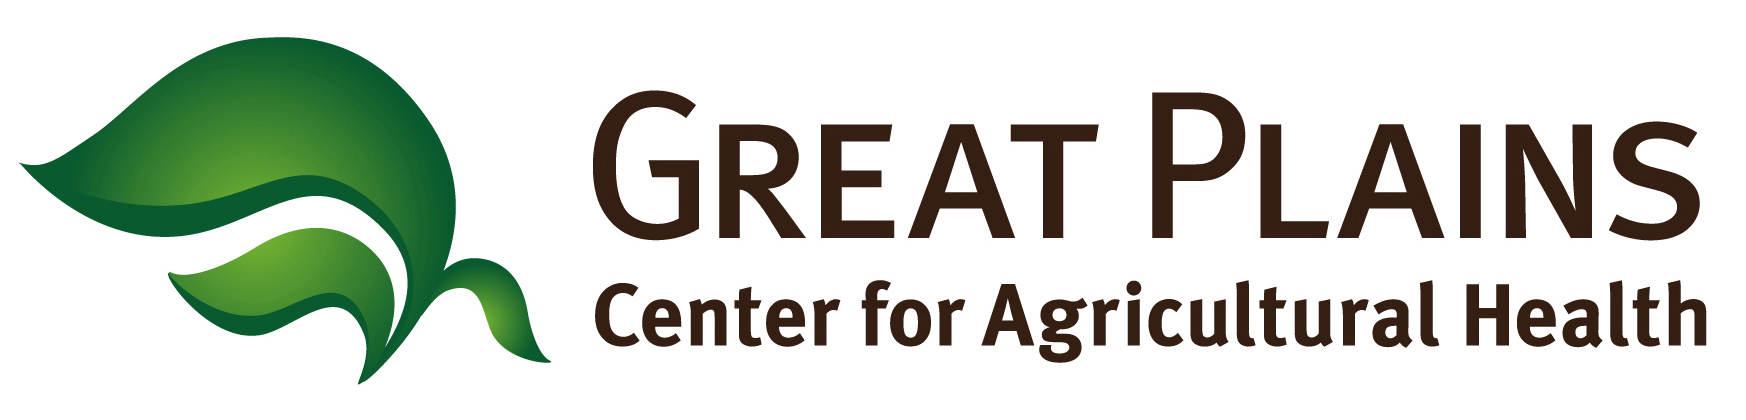 Link to Great Plains Center for Agricultural Health